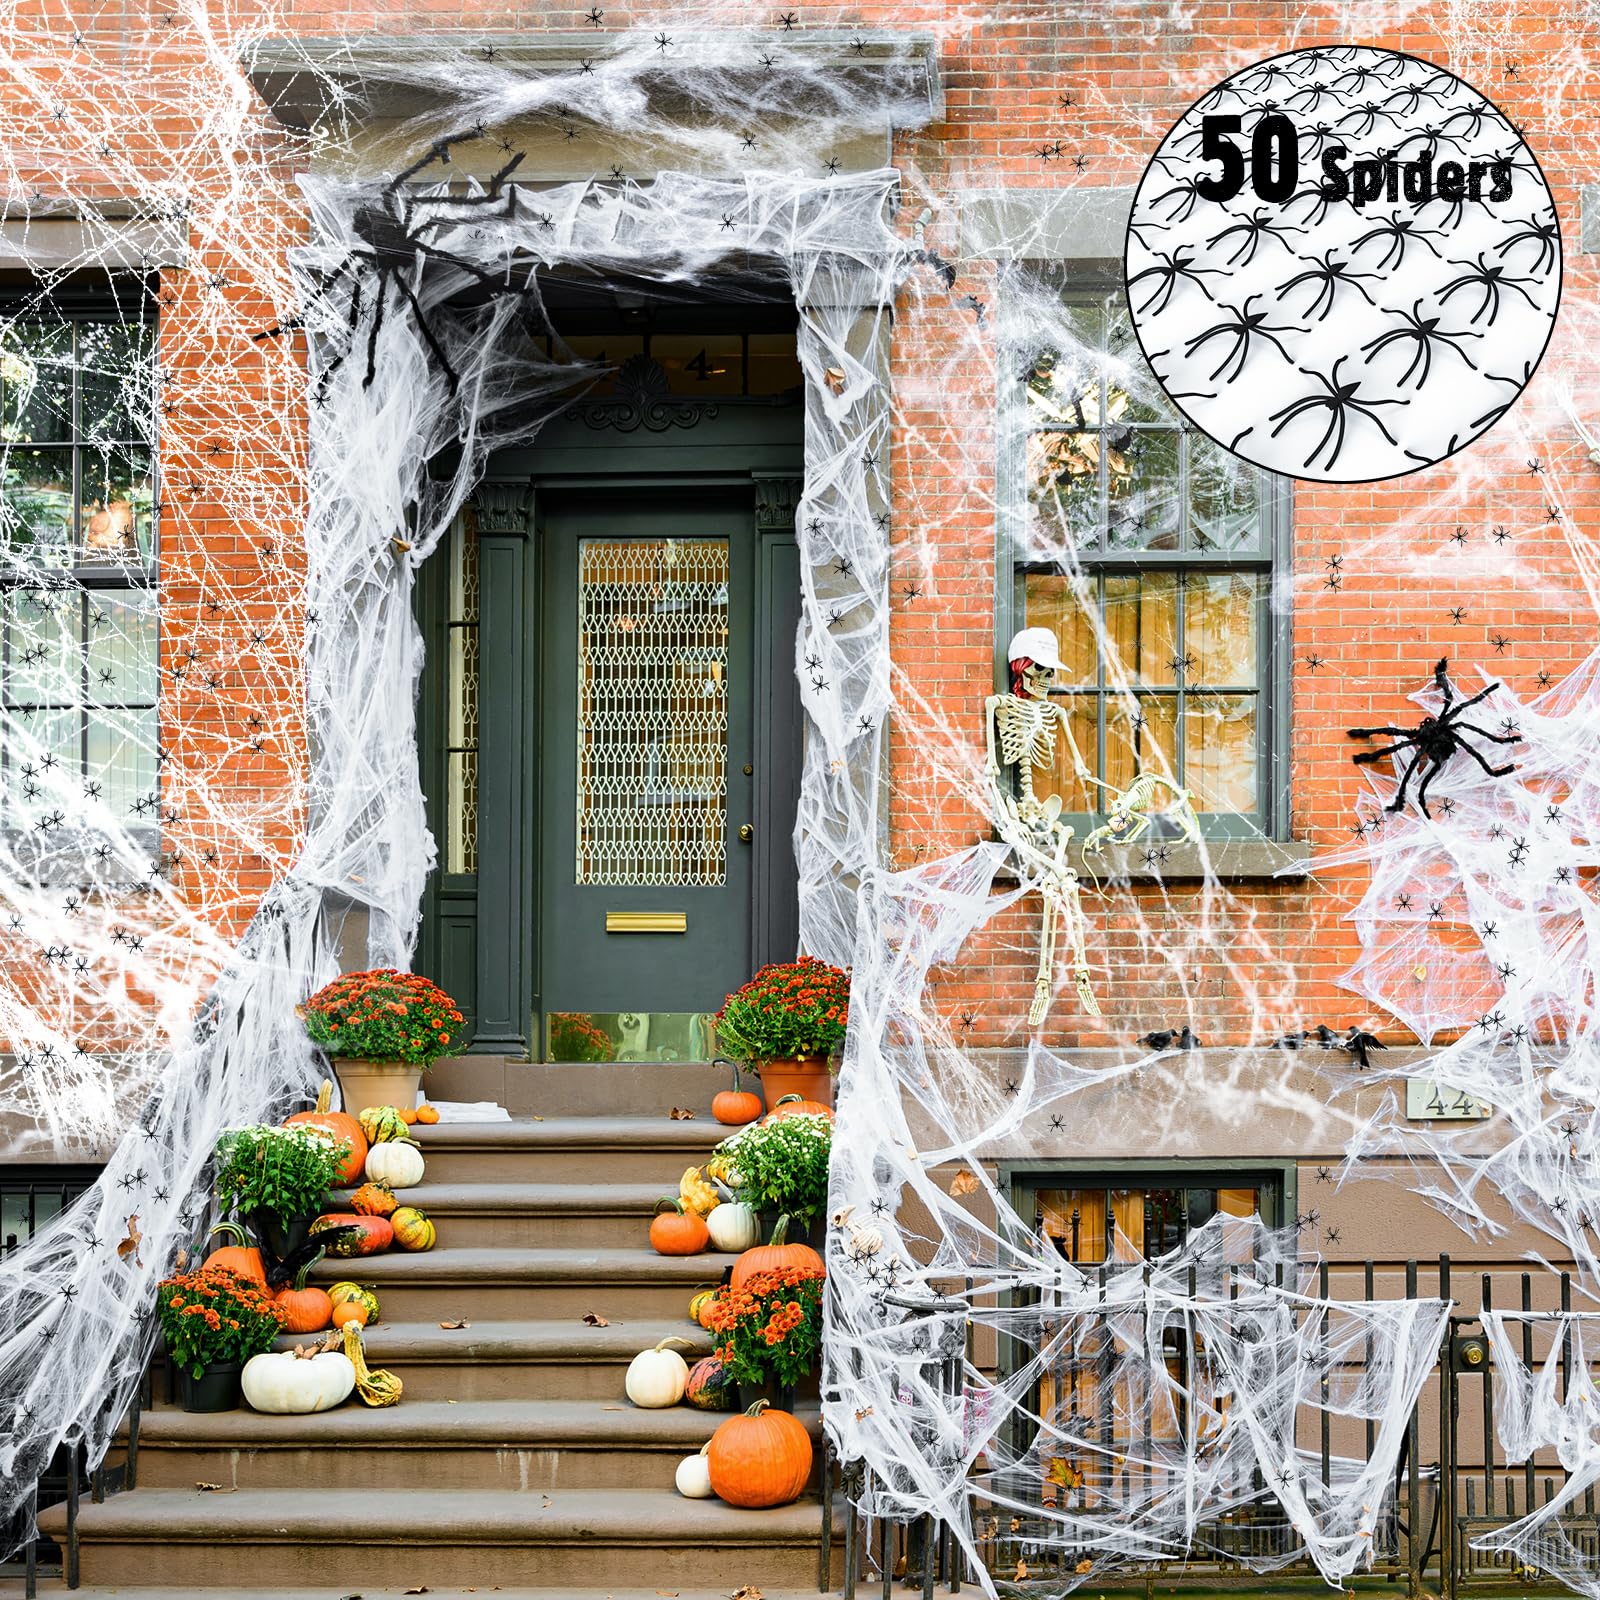 Hompavo 【Upgraded】 1000 sqft Spider Webs Halloween Decorations with 30 Extra Fake Spiders, Realistic Stretchy Cobwebs Halloween Decor for Indoor Outdoor Party Supplies